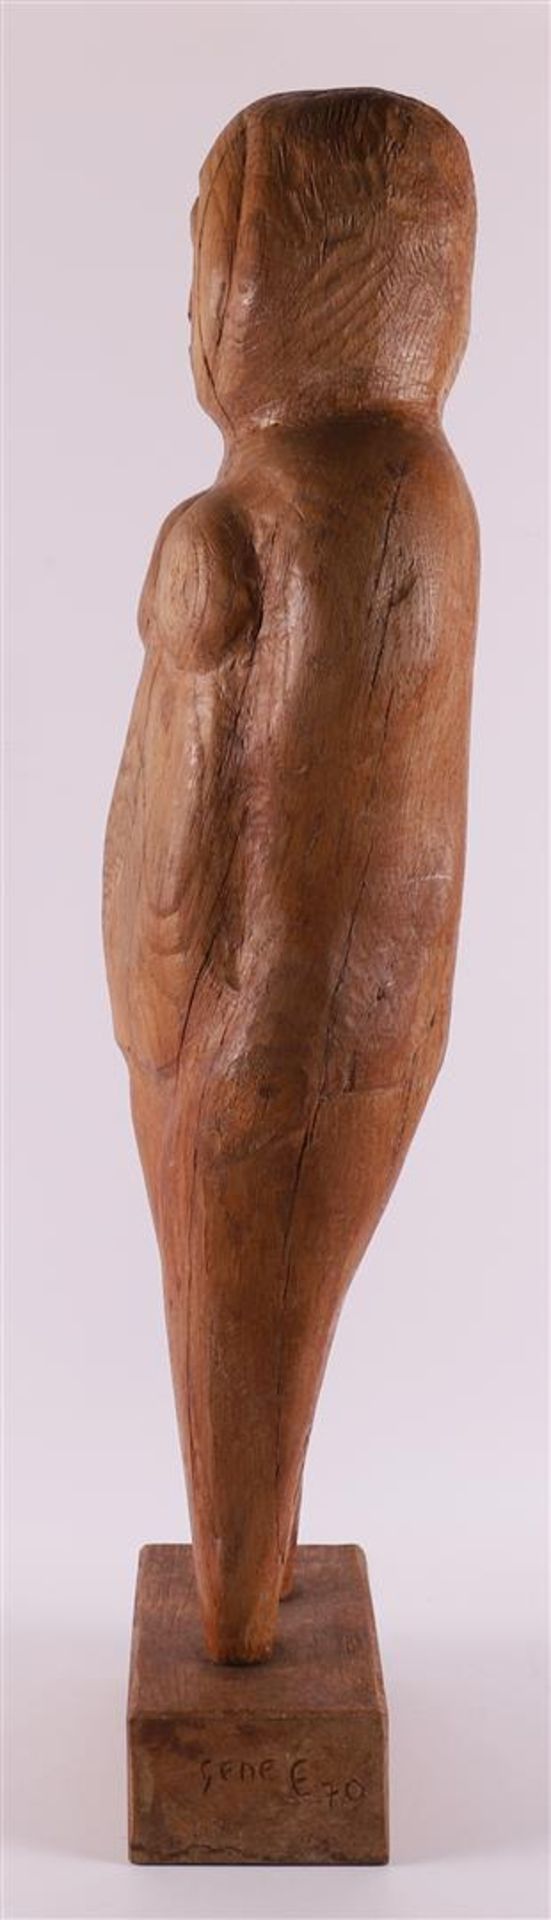 Eggen, Gene (1921-2000) A wooden sculpture of a woman, 2nd half of the 20th cent - Image 6 of 7